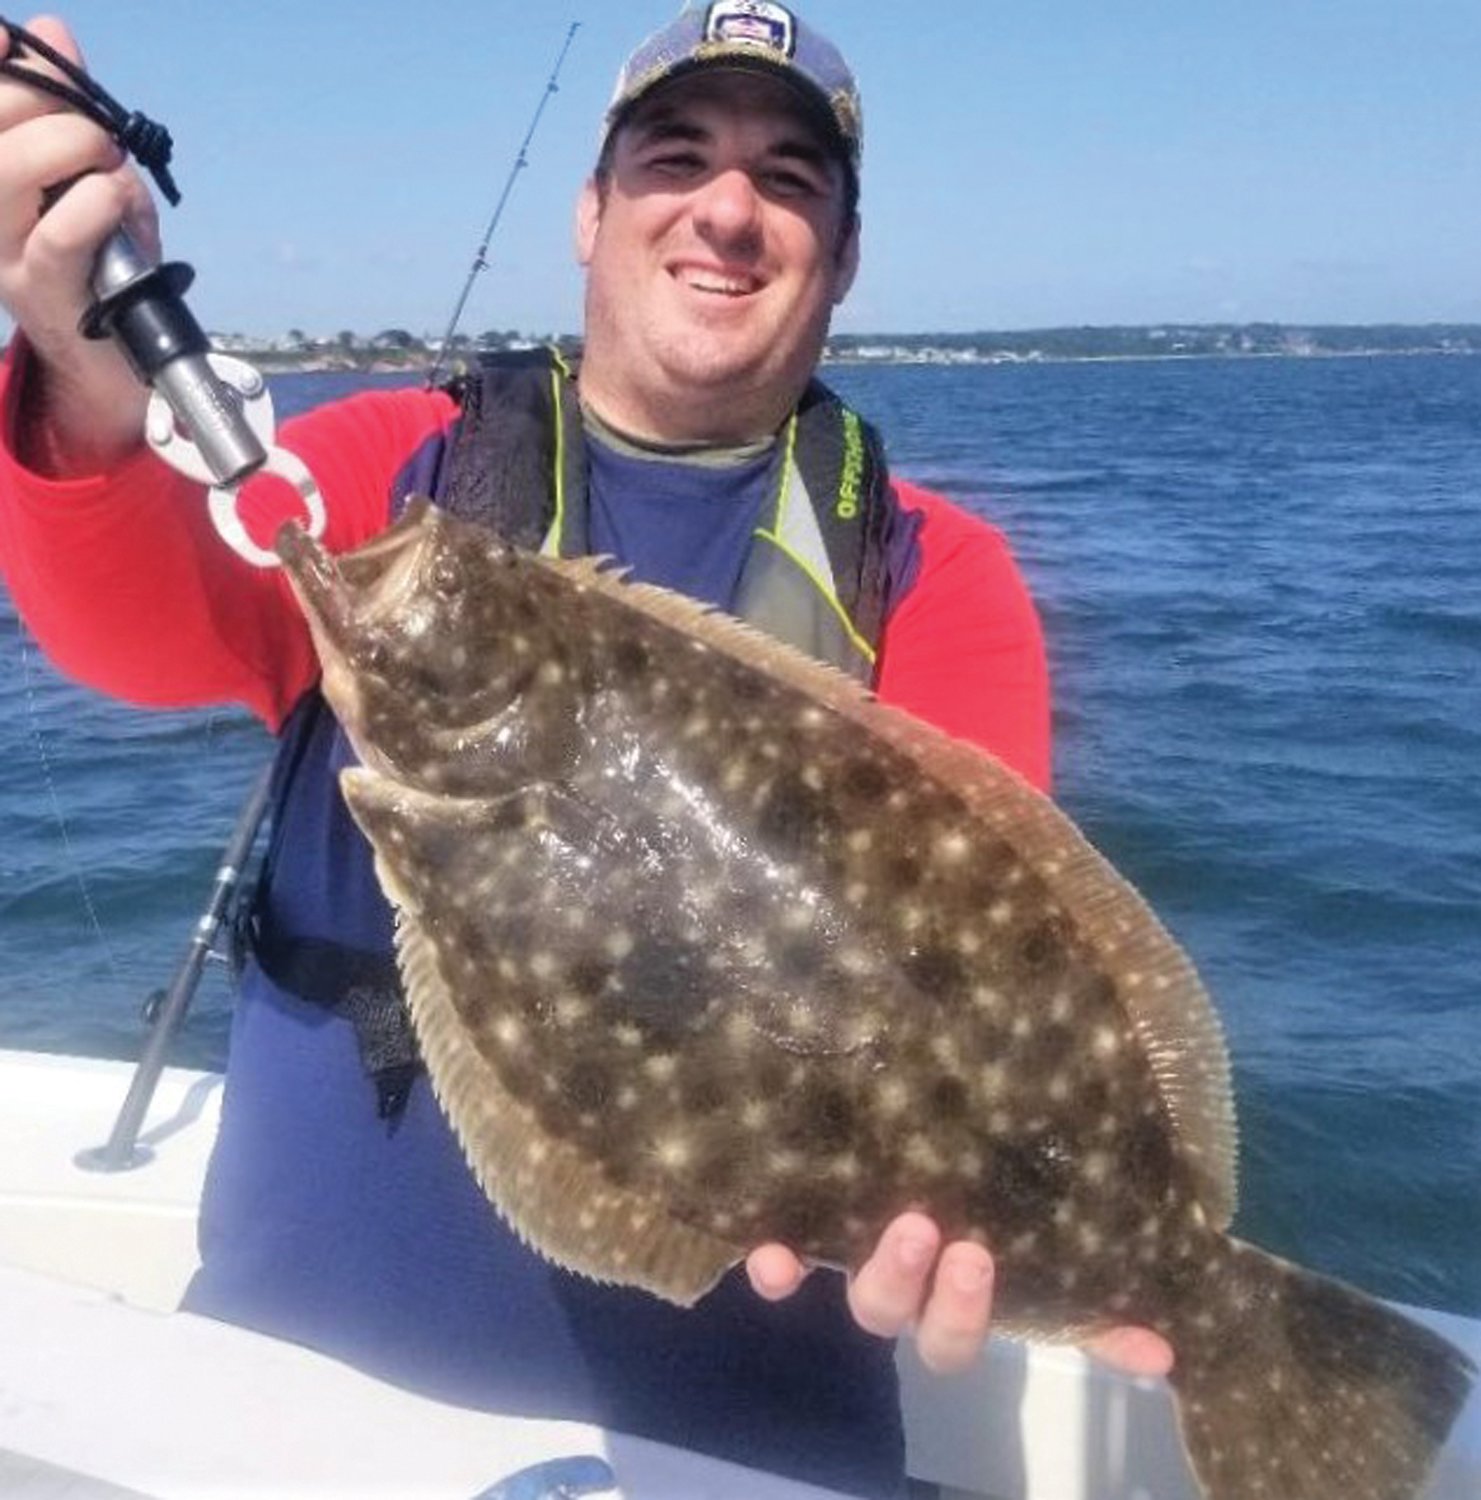 BIG FLUKE: Jake Howard of Minnesota with his first ever summer flounder, a 22-inch fluke caught at Austin Hollow, Jamestown, drifting down the bank in 65 feet of water.